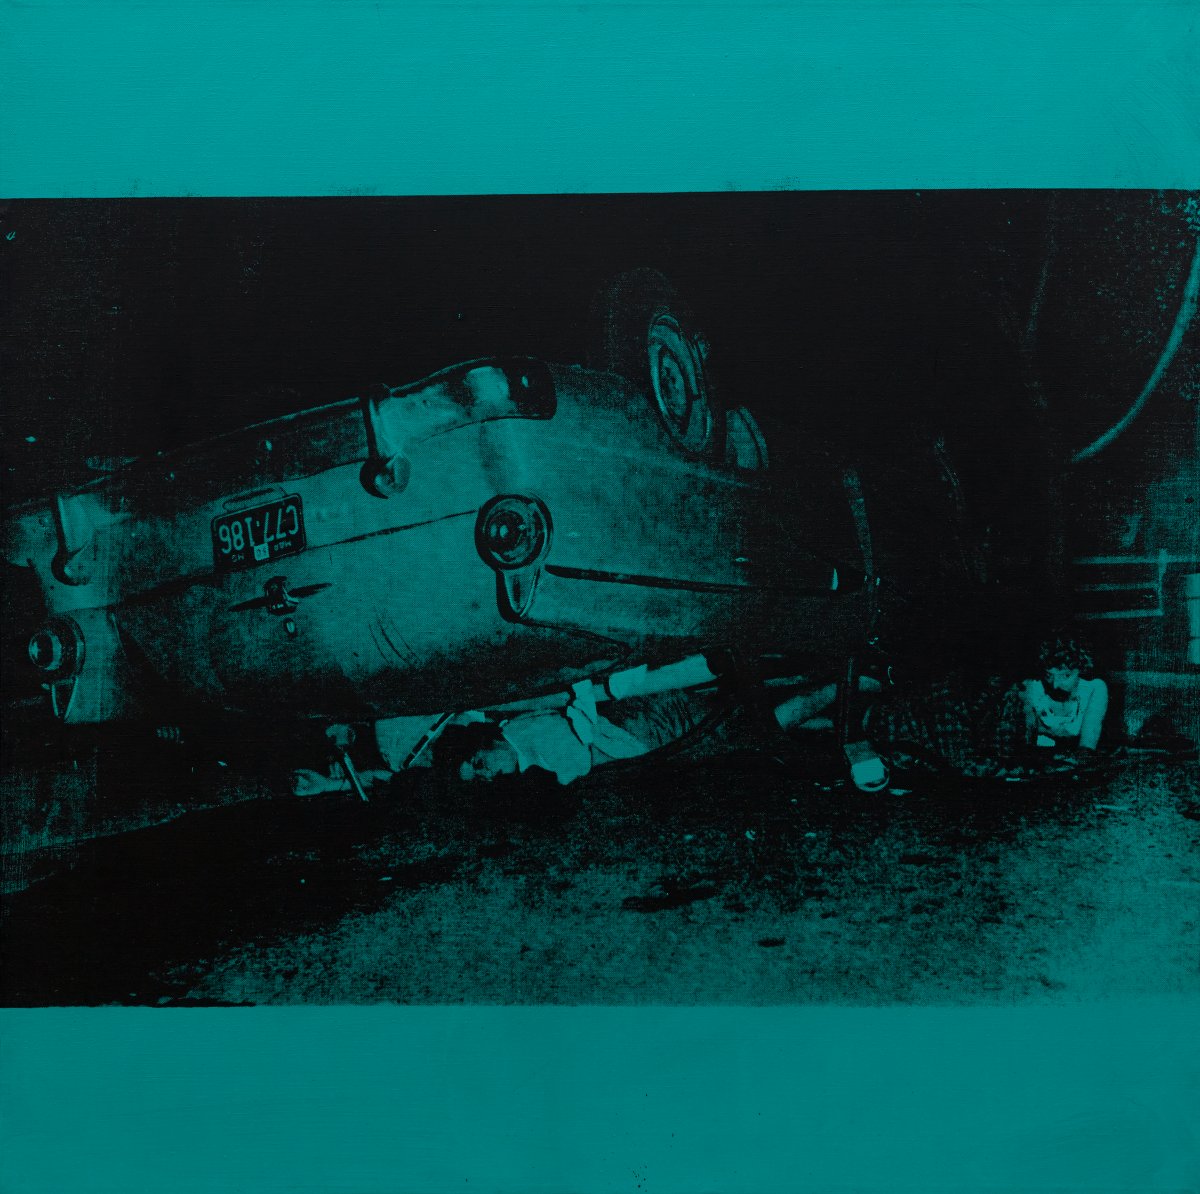 Andy Warhol, Five Deaths on Turquoise, 1963